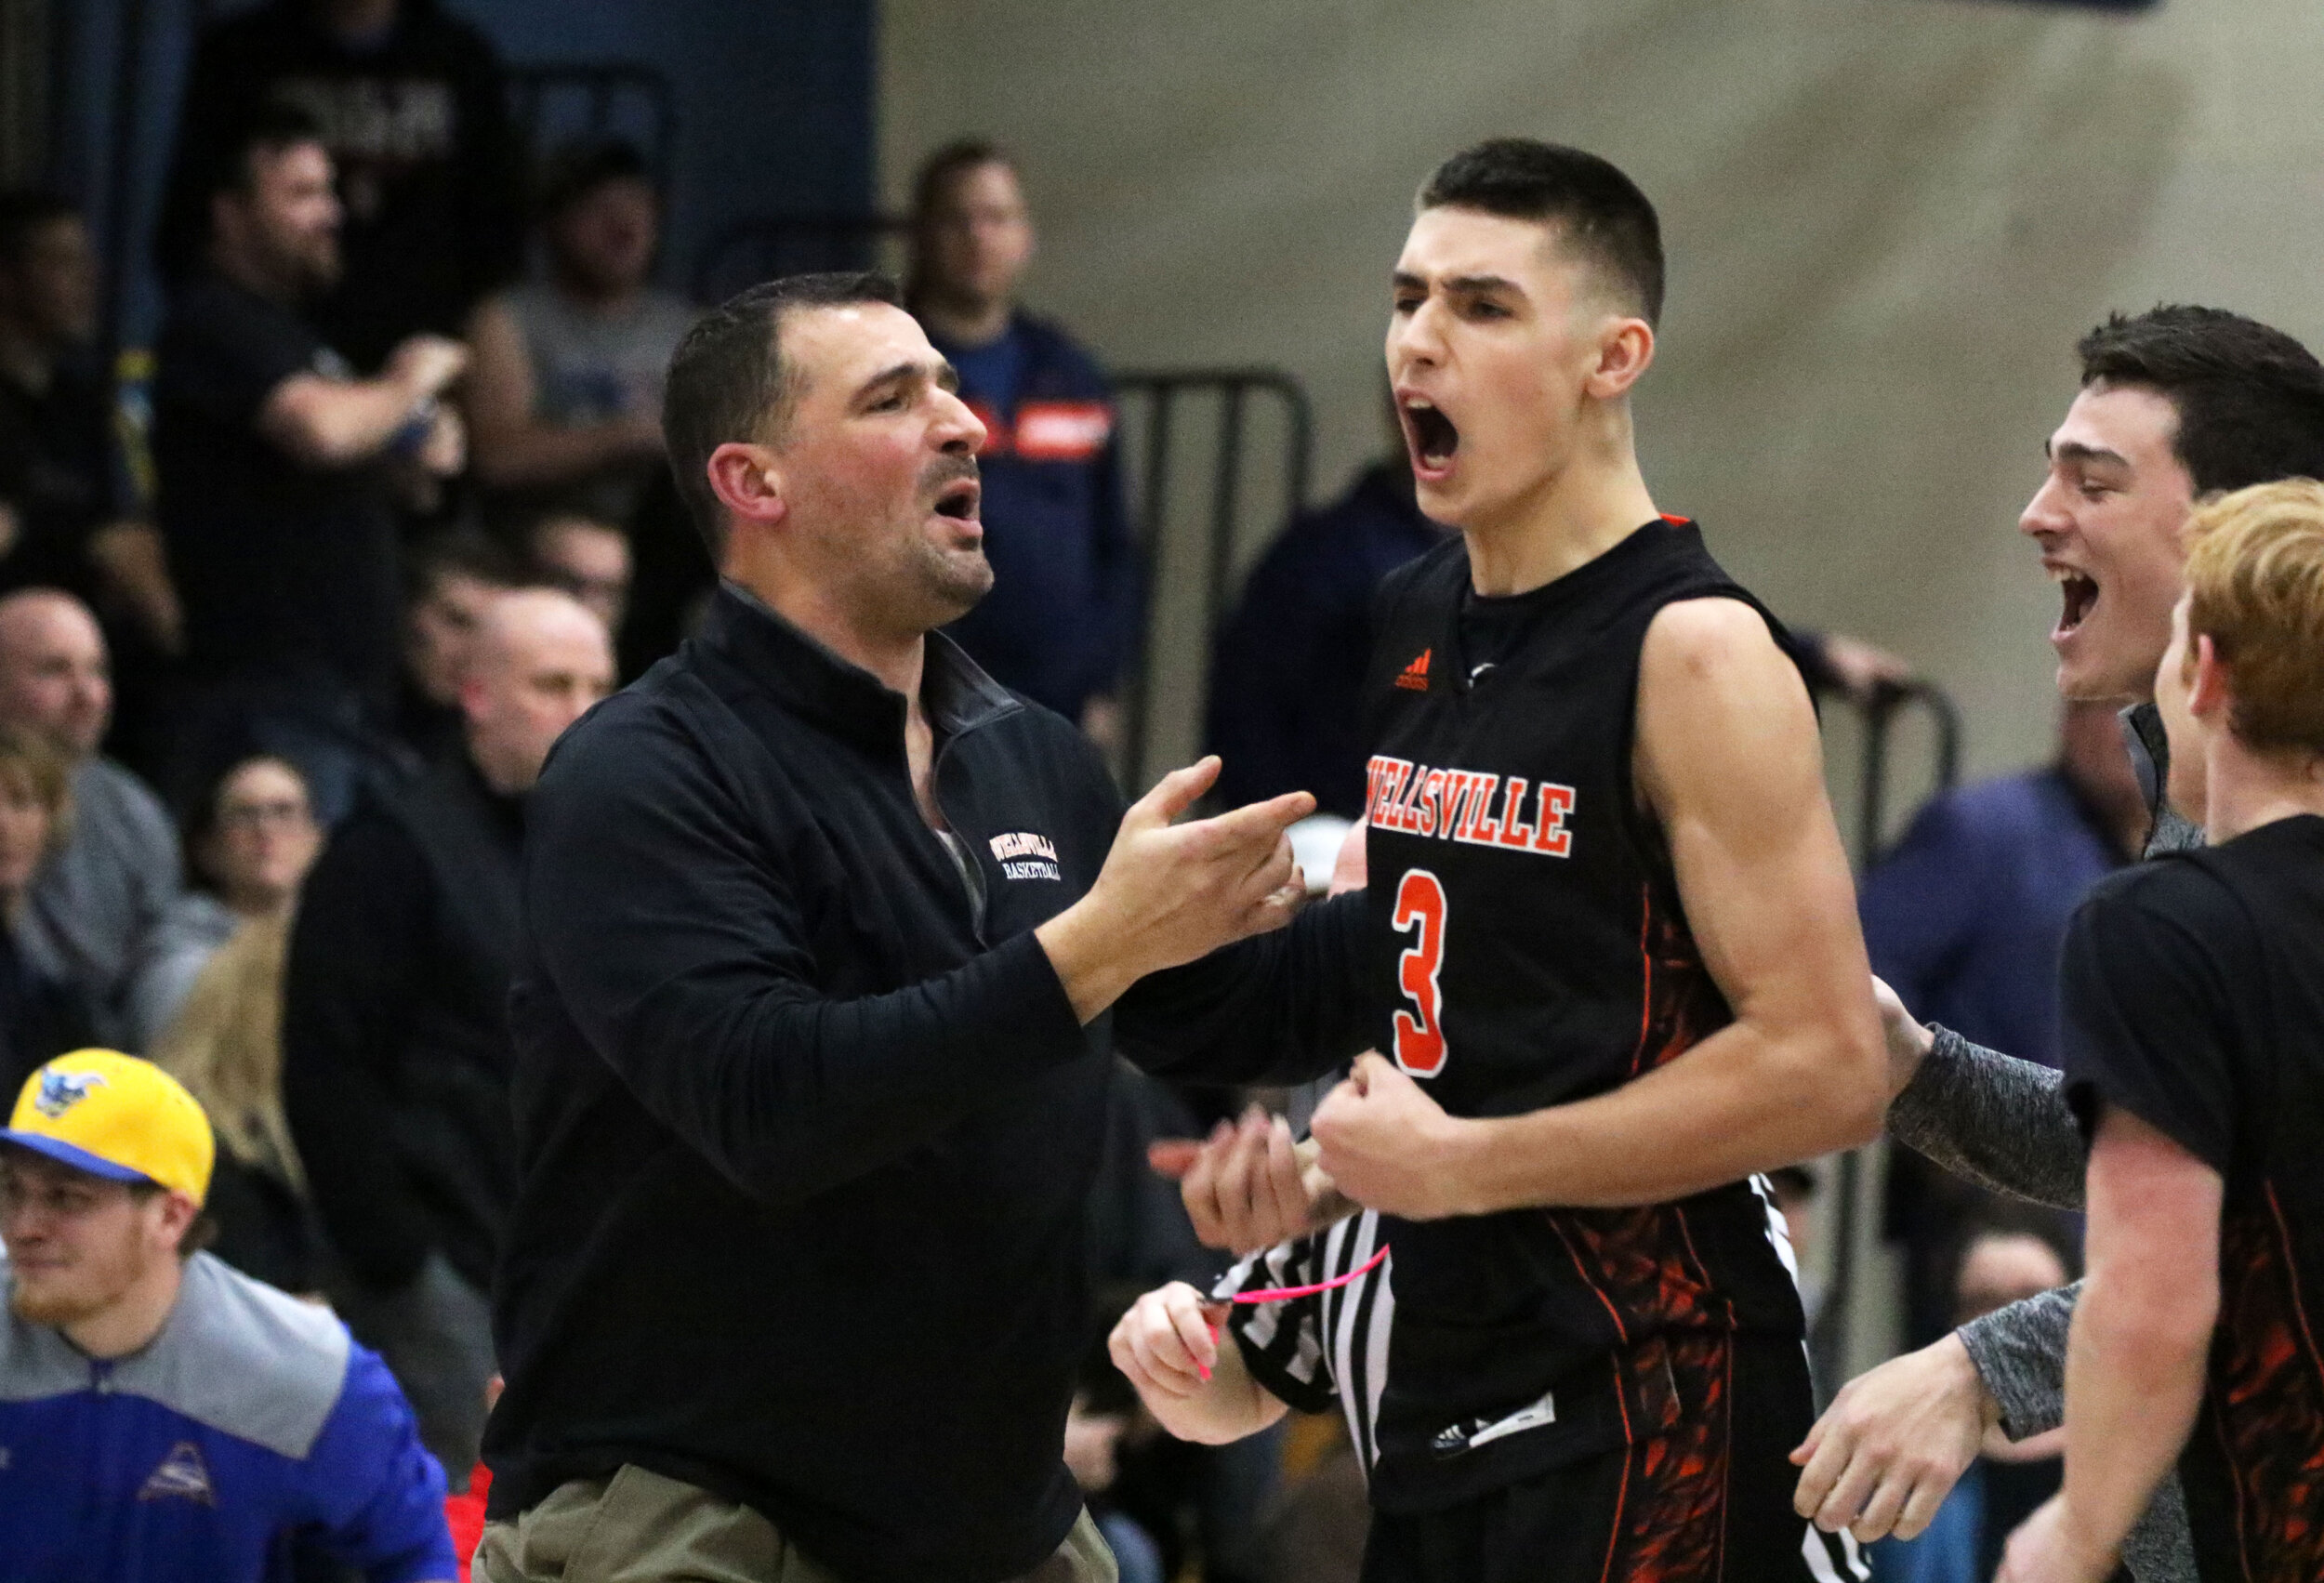  Wellsville senior Max Jusianiec (3) celebrates on the sidelines with his father, Lions interim head coach Jerry Jusianiec, left, after he sealed a 46-45 victory over Hornell with a buzzer-beating block in the Barkley Showcase’s nightcap on Friday at